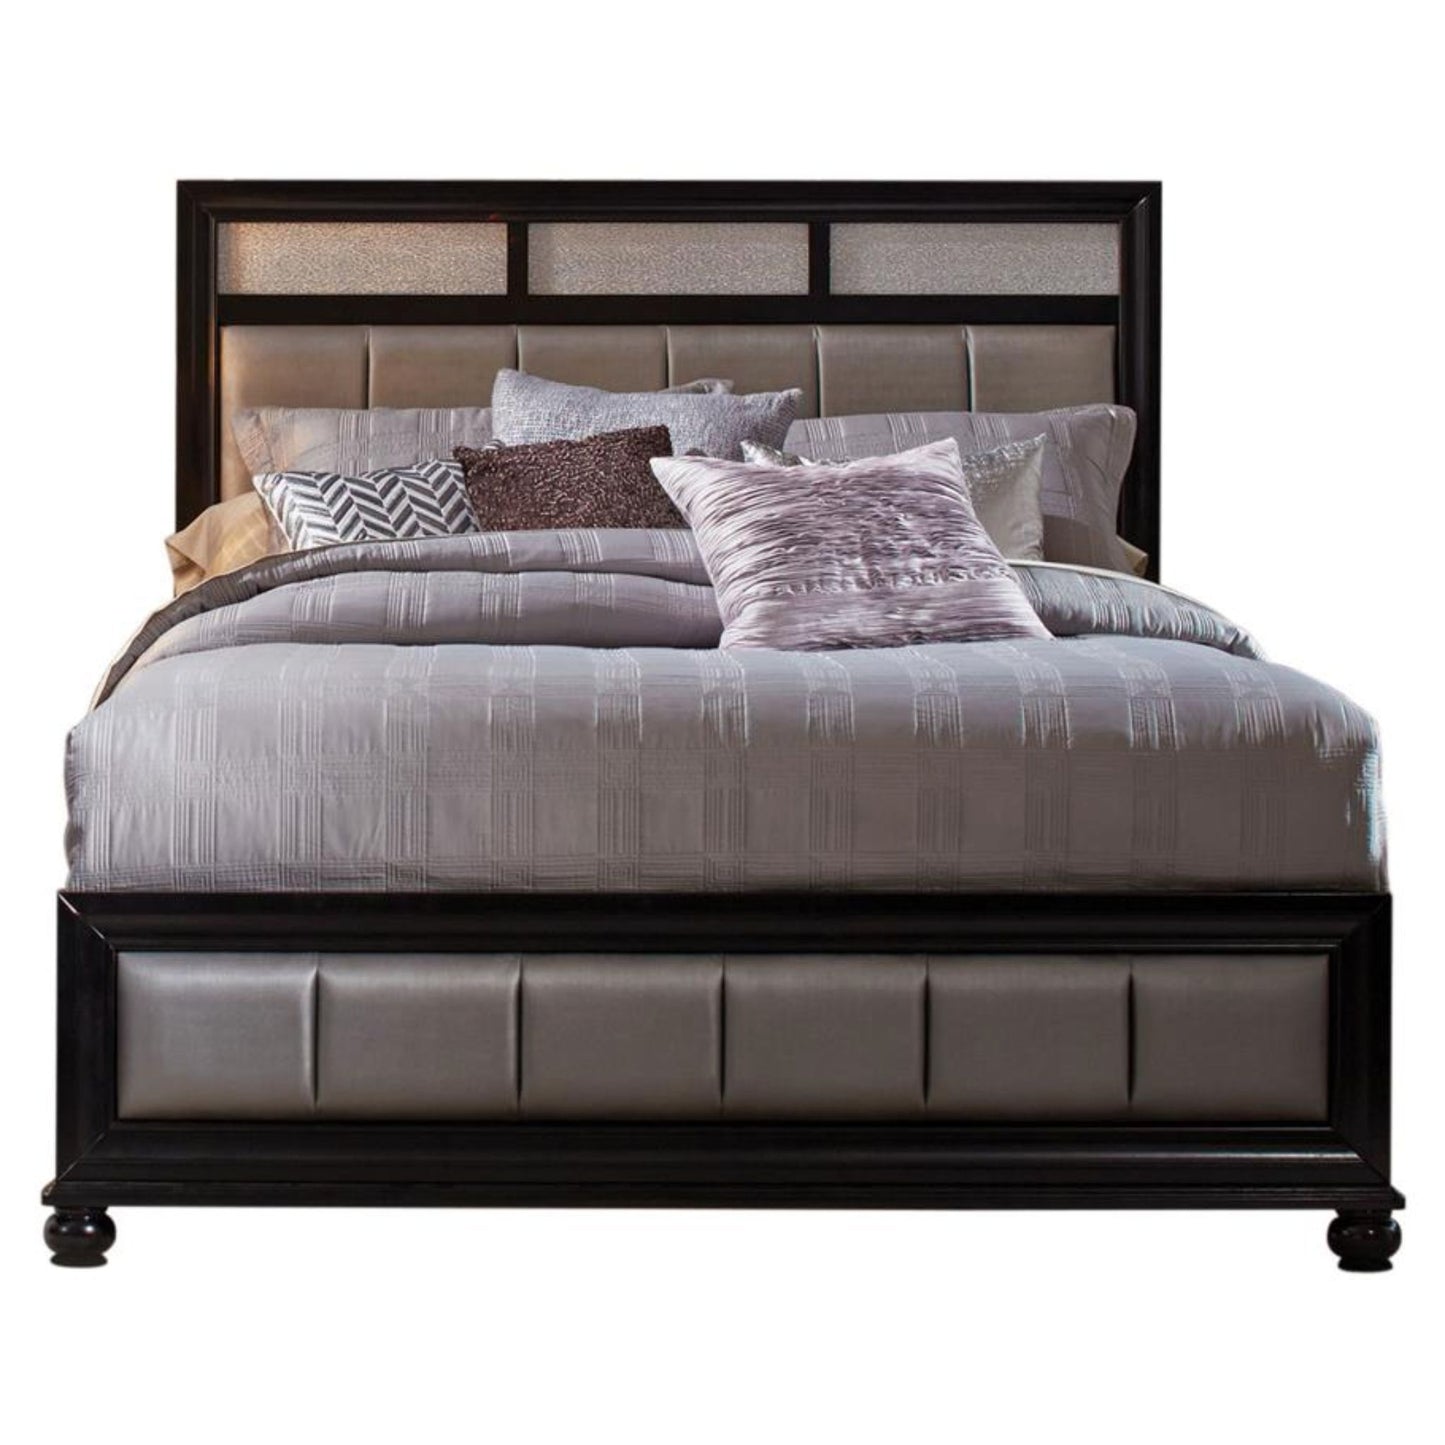 BARZINI Queen Upholstered Bed Black